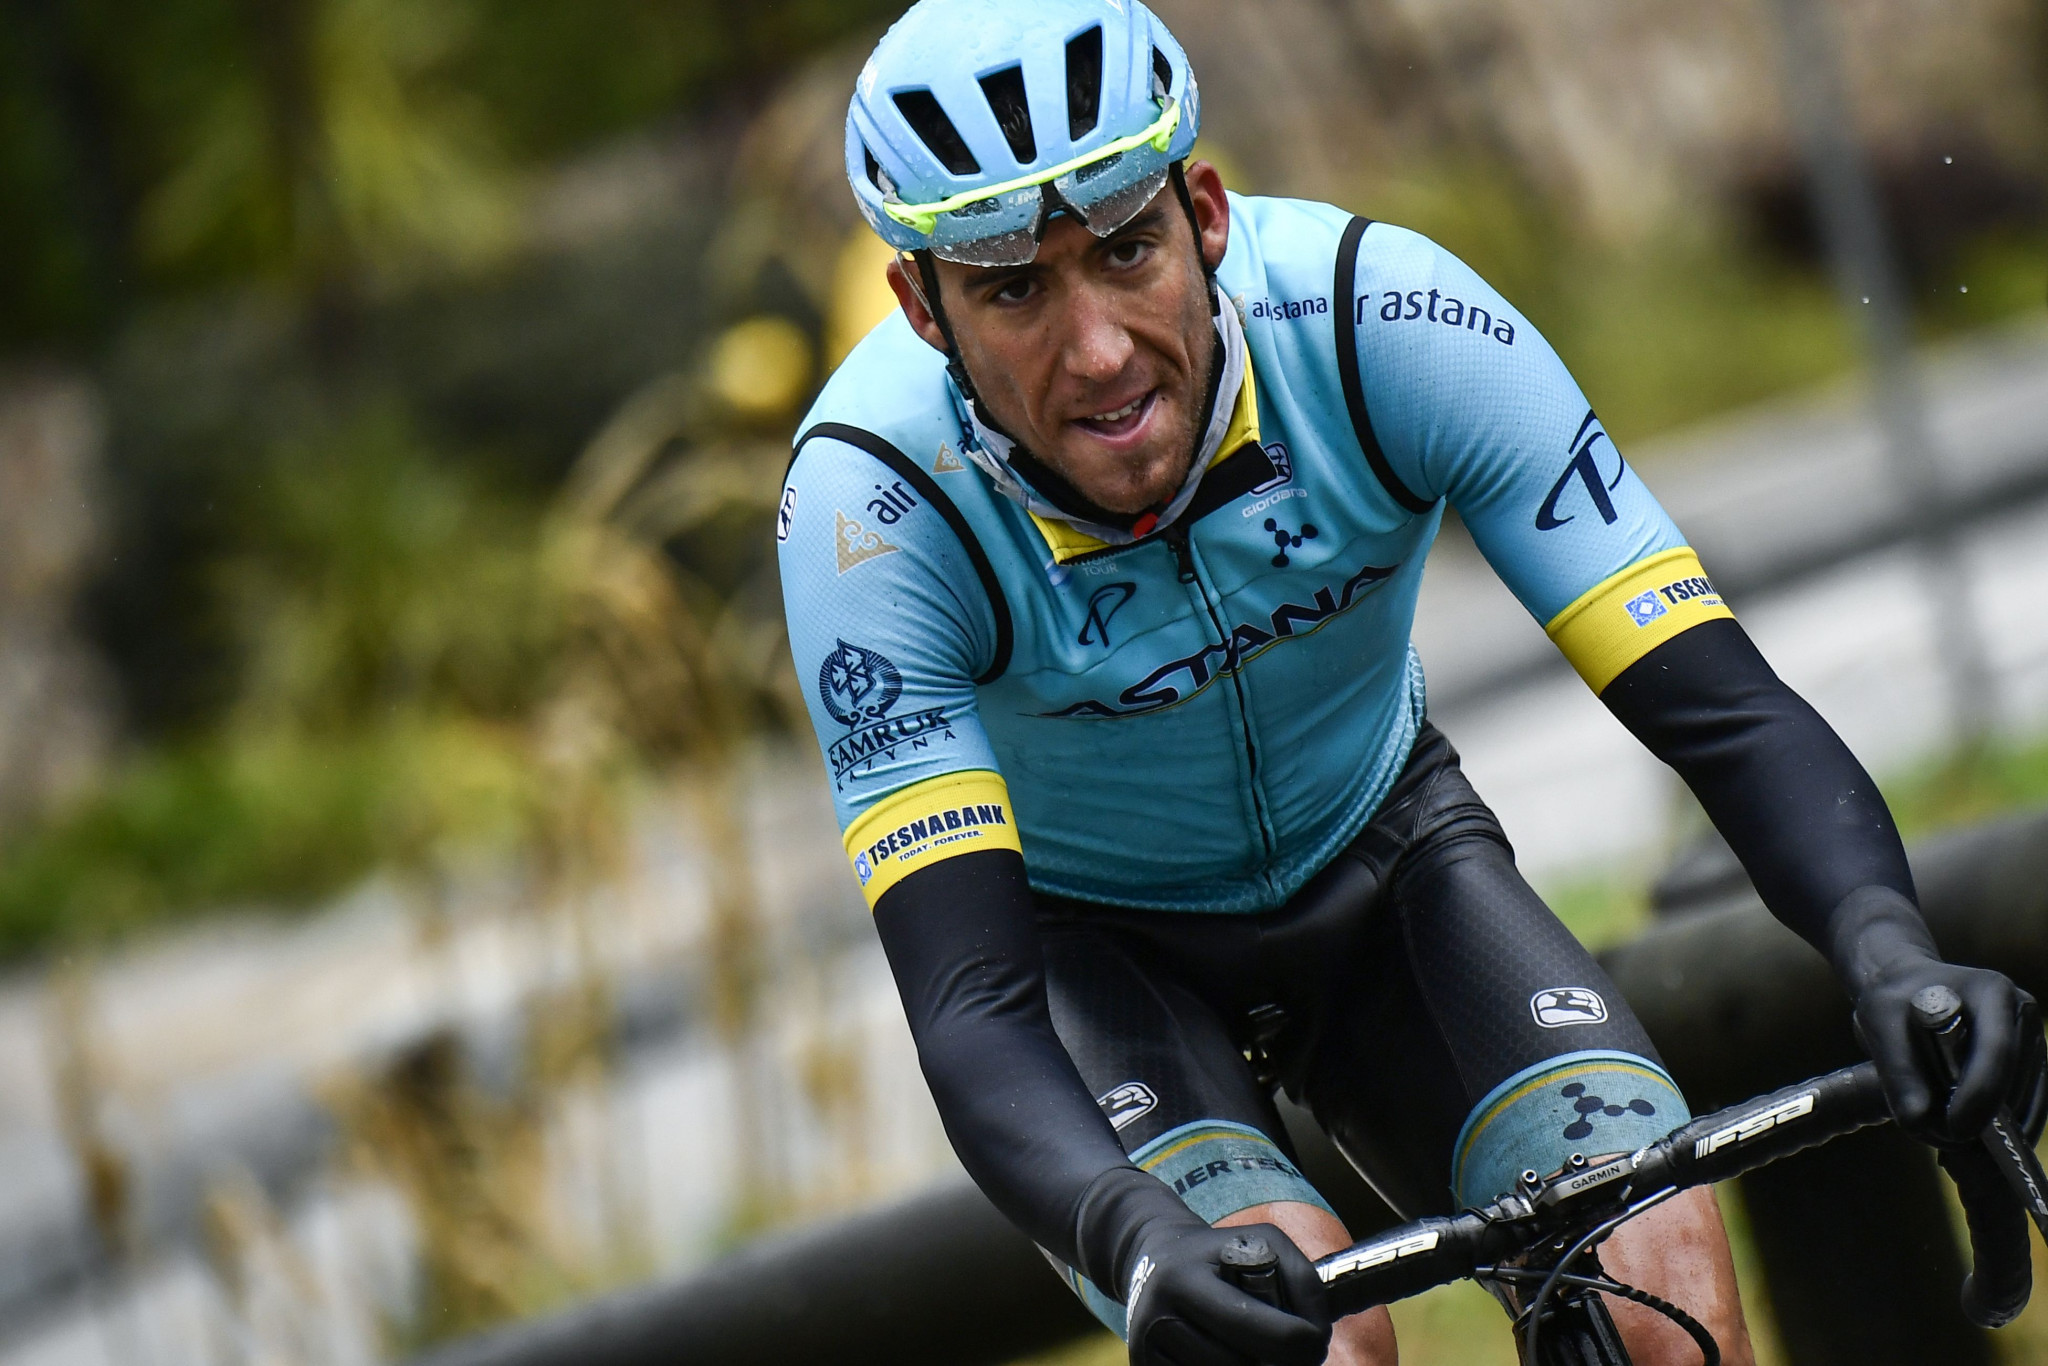 Fraile wins stage five of Tour of the Basque Country as Roglič strengthens overall lead